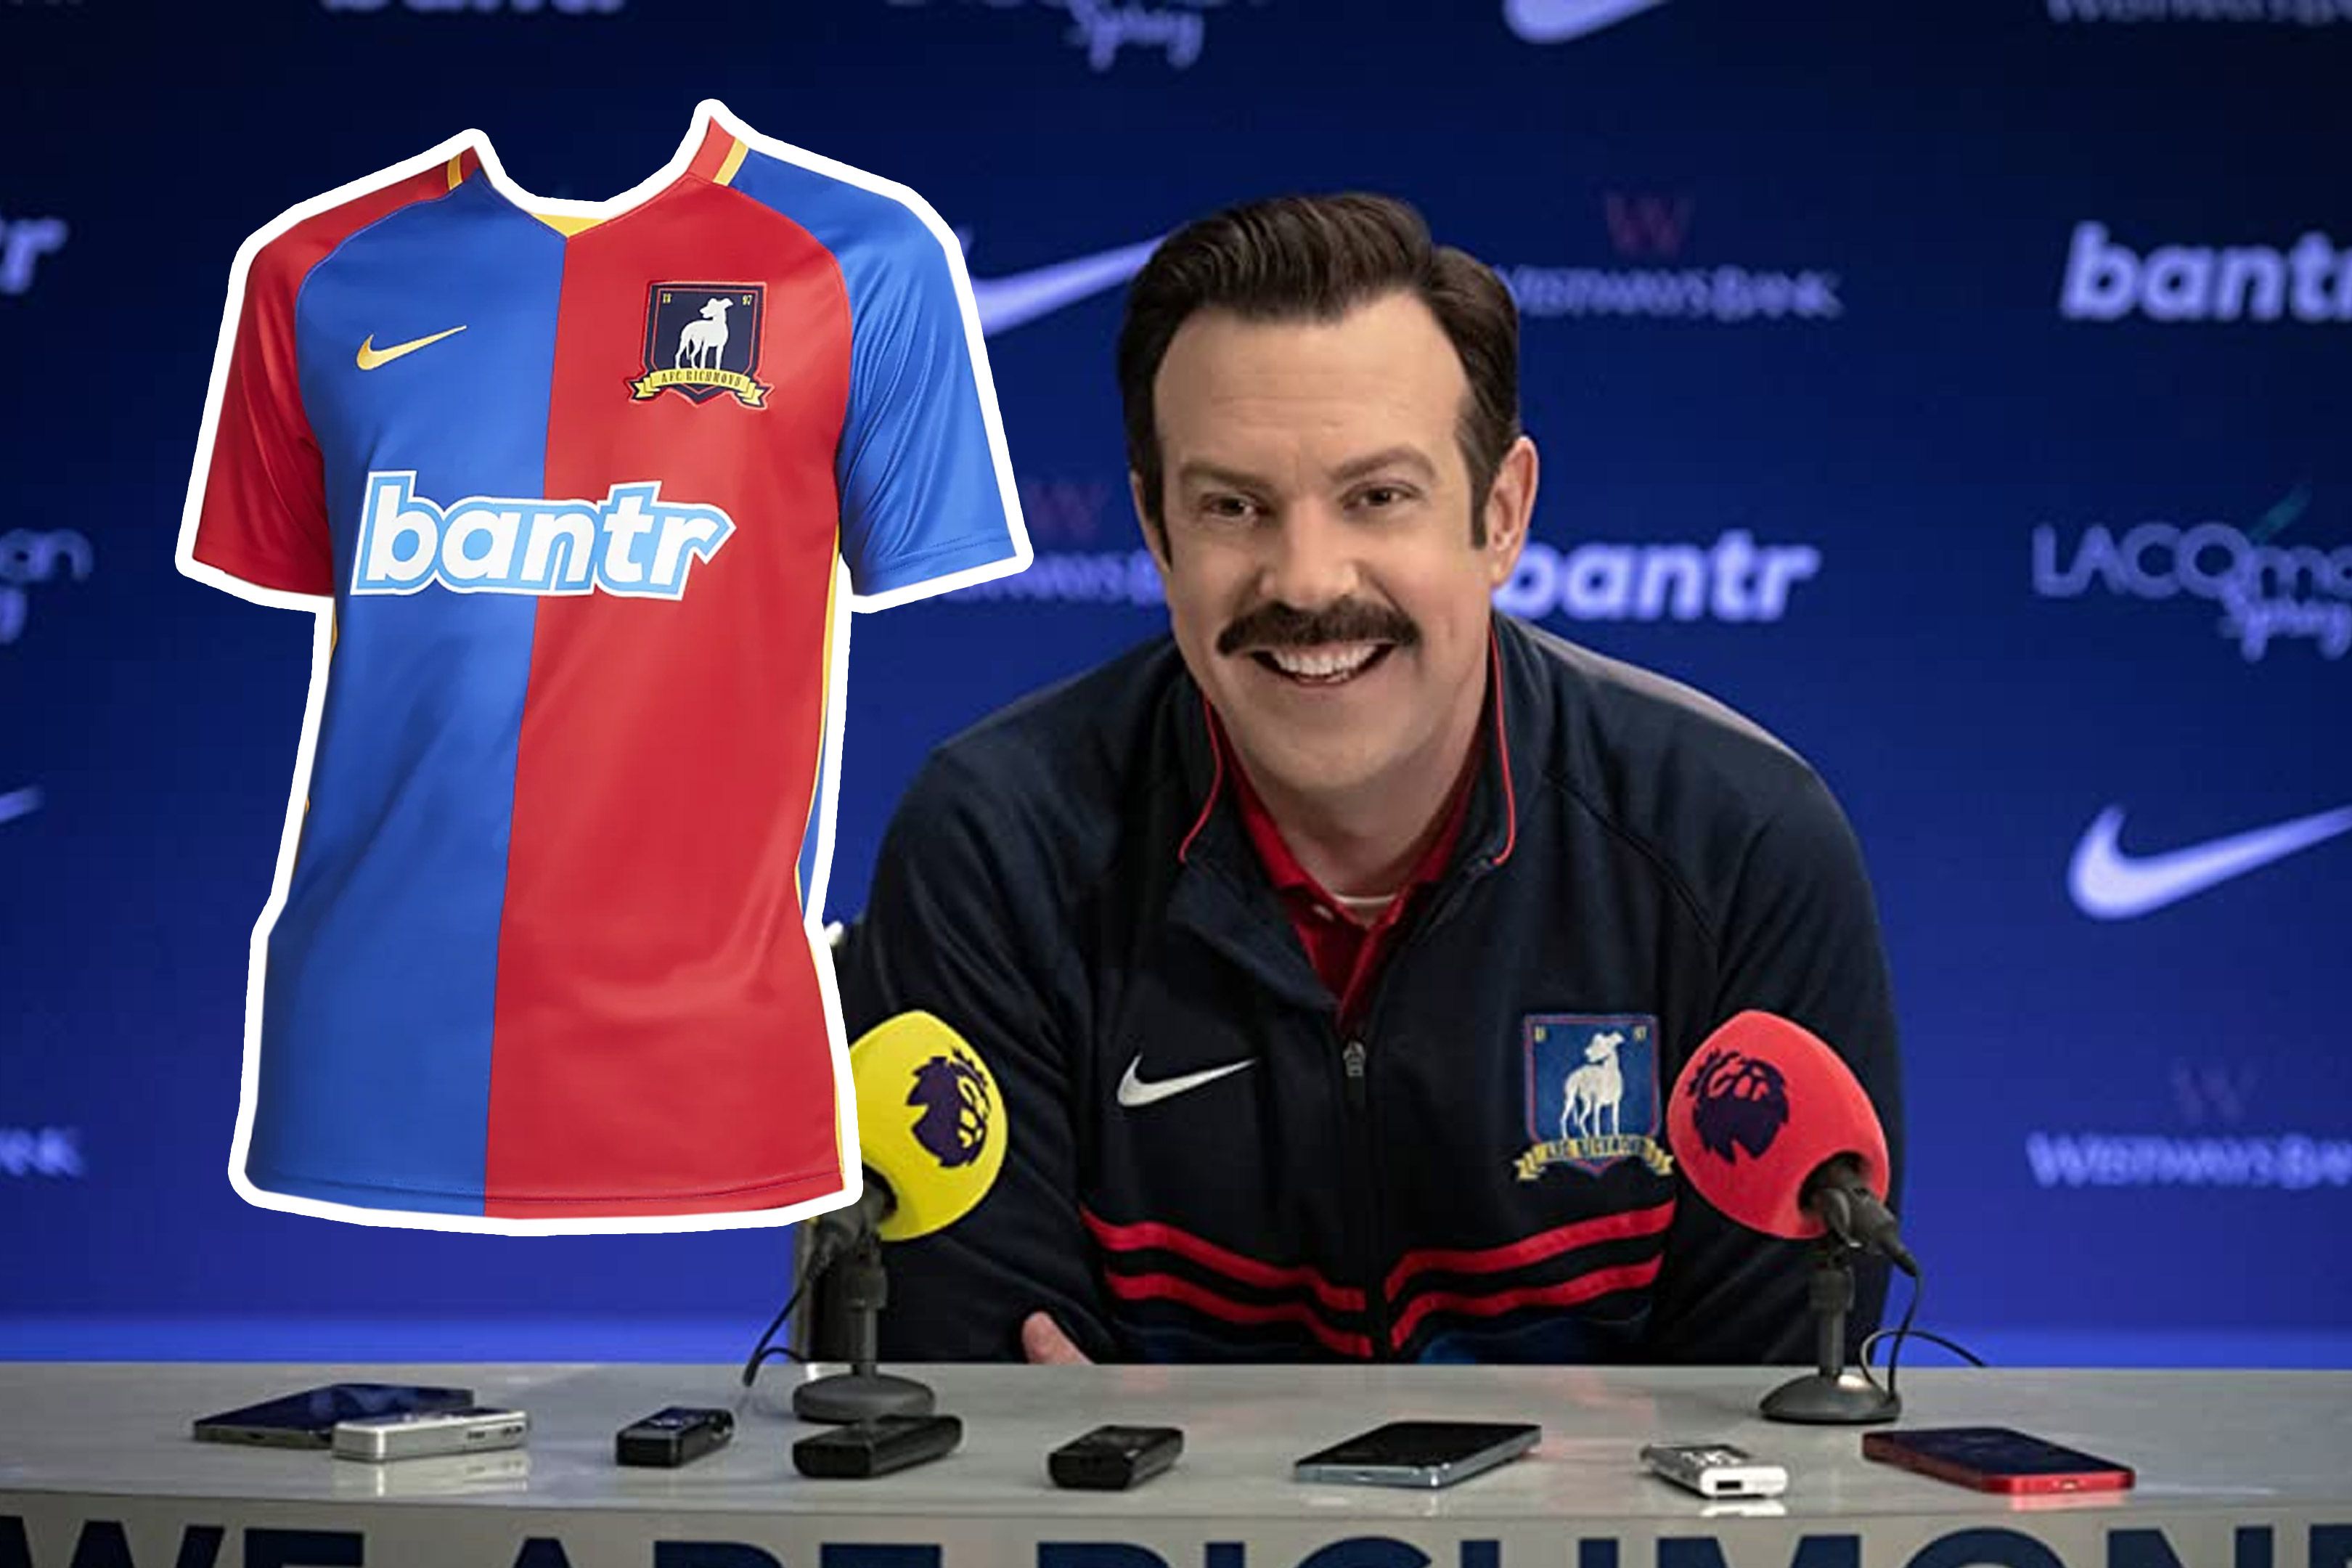 Is 'Ted Lasso' Footballer Zava Based on a Real Person?